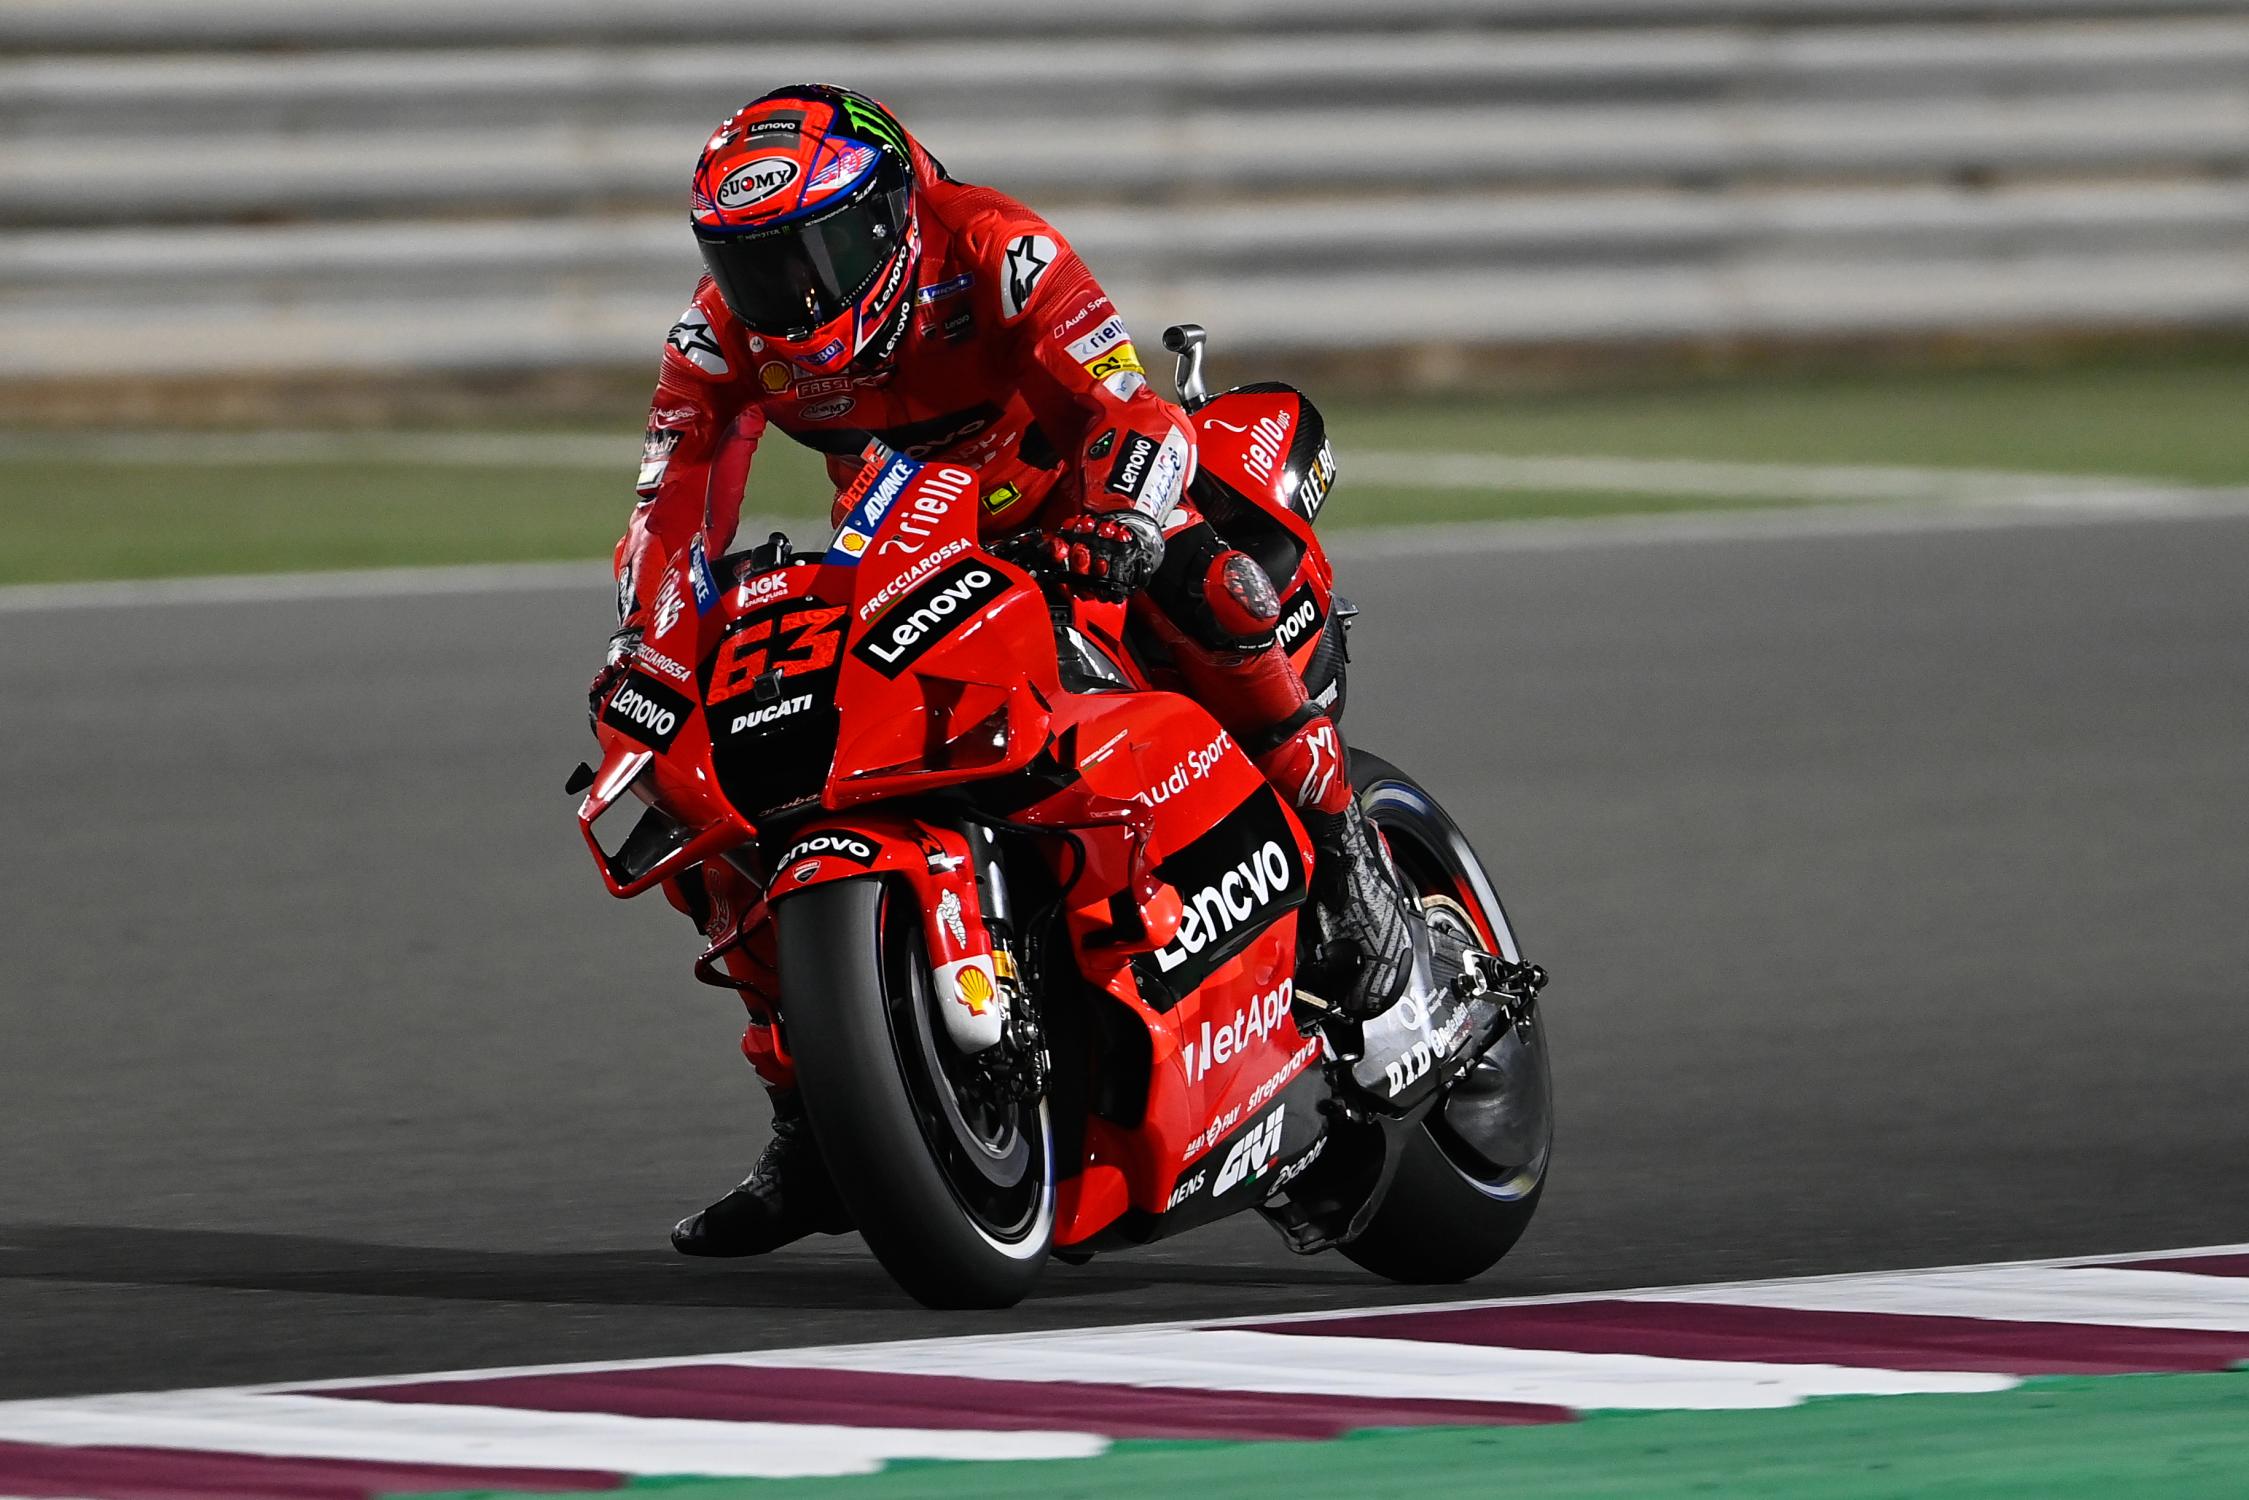 MotoGP technique: The Ducati “spoon” has disappeared, but why?